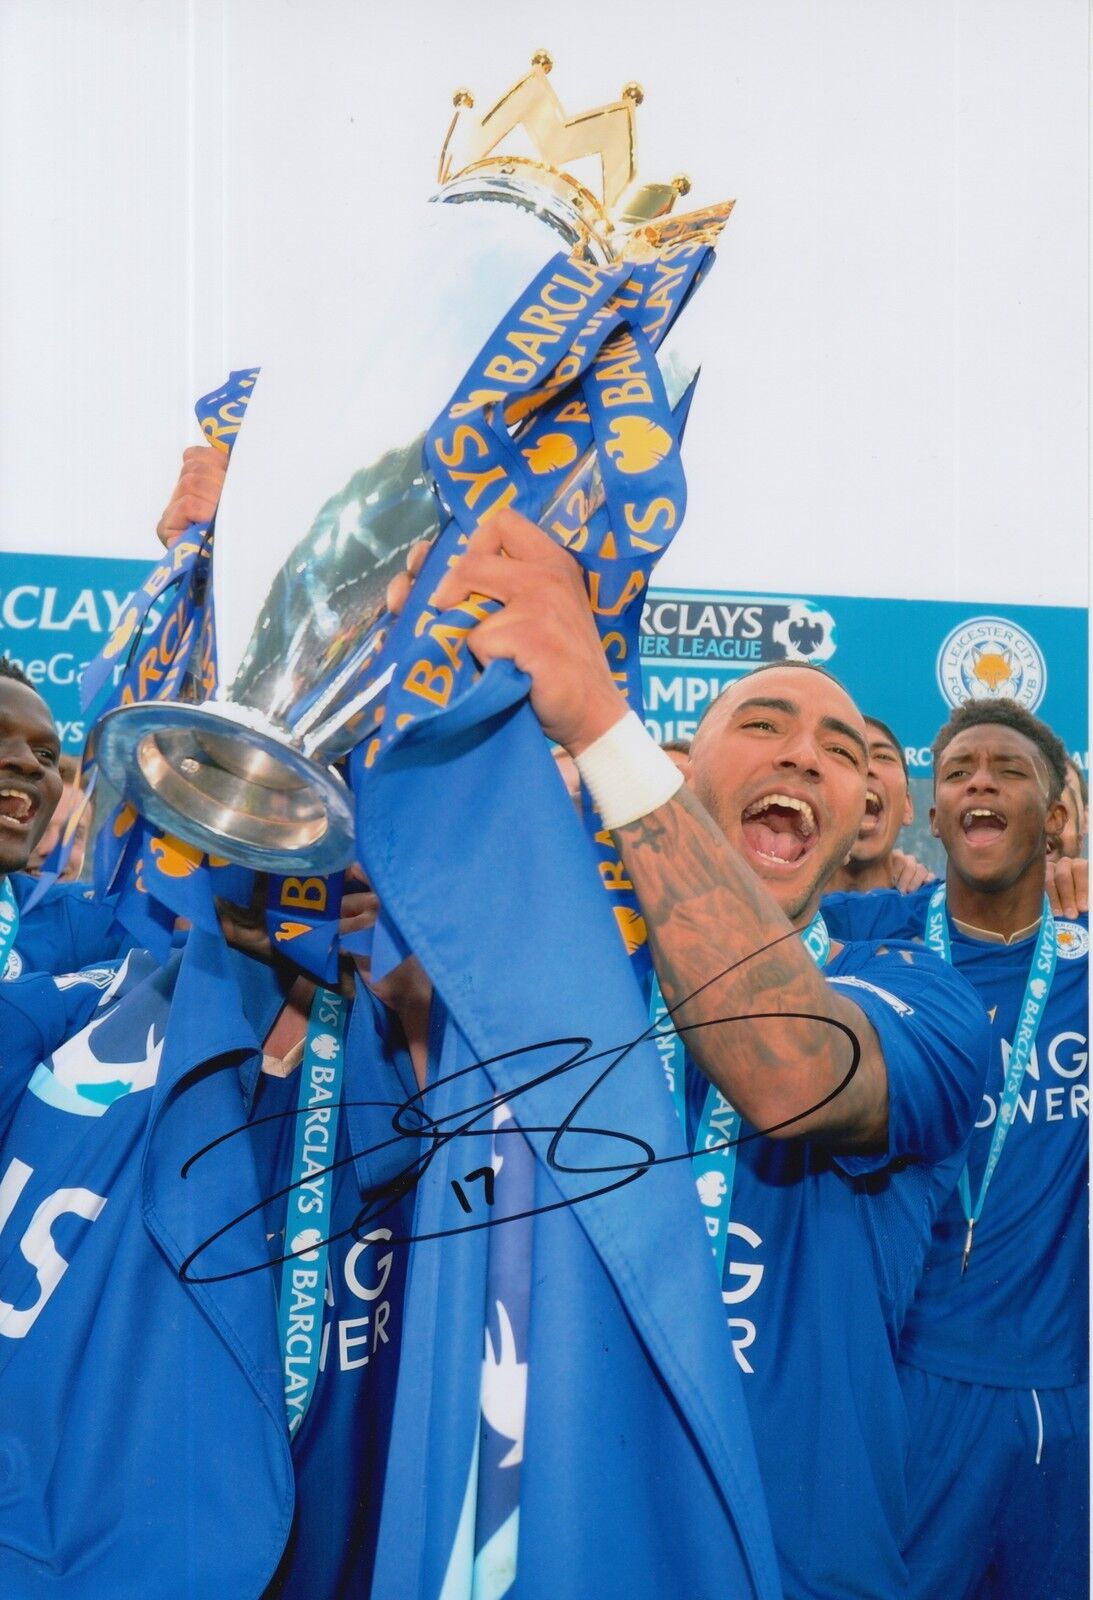 LEICESTER CITY HAND SIGNED DANNY SIMPSON 12X8 Photo Poster painting CHAMPIONS 16 TROPHY 2.